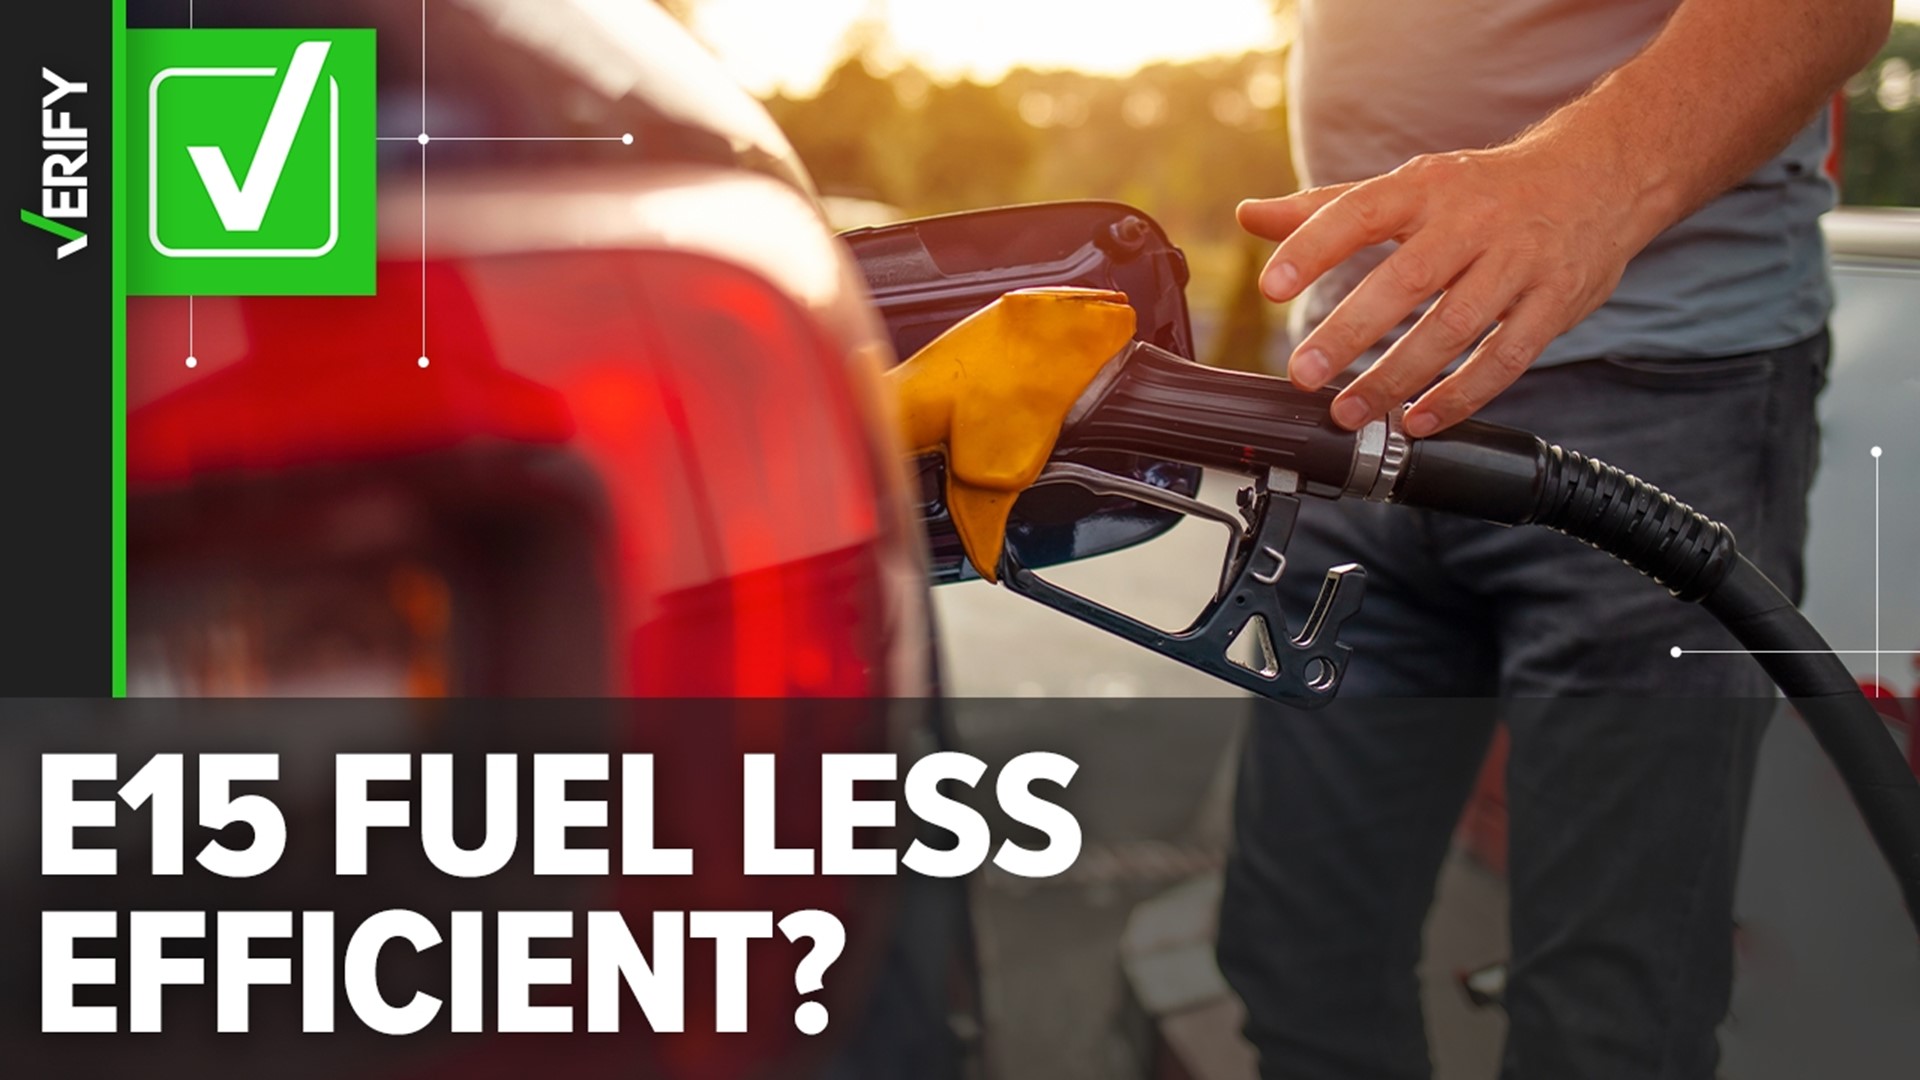 The EPA approved year-round sales of higher ethanol E15 gasoline in 8 states. E15 could decrease your gas mileage, but the difference is small for most drivers.